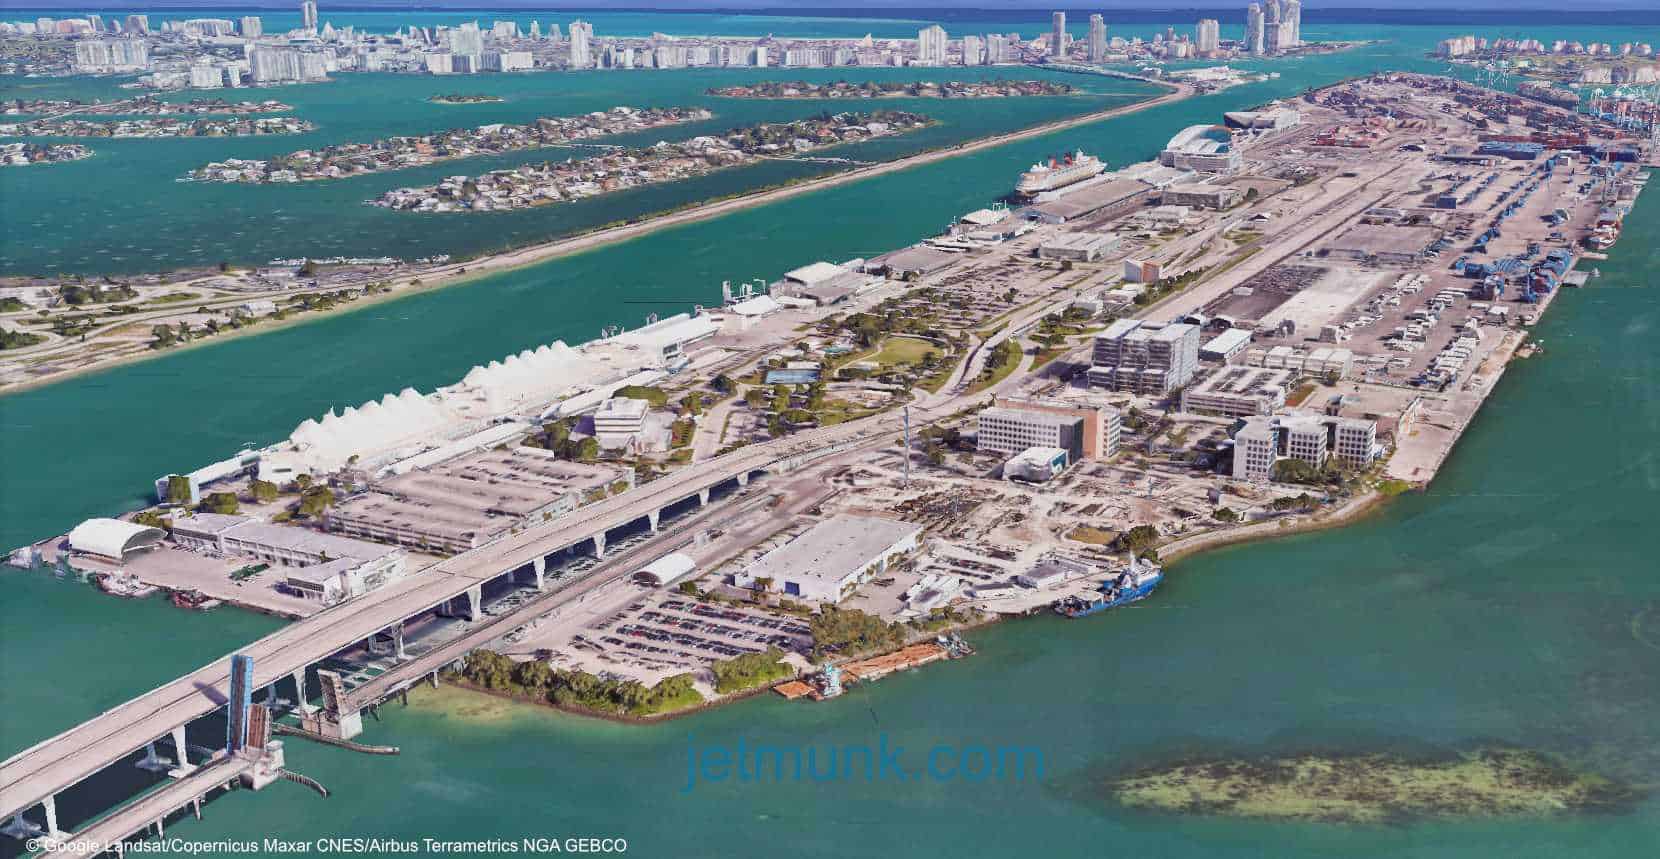 where is the miami carnival cruise port